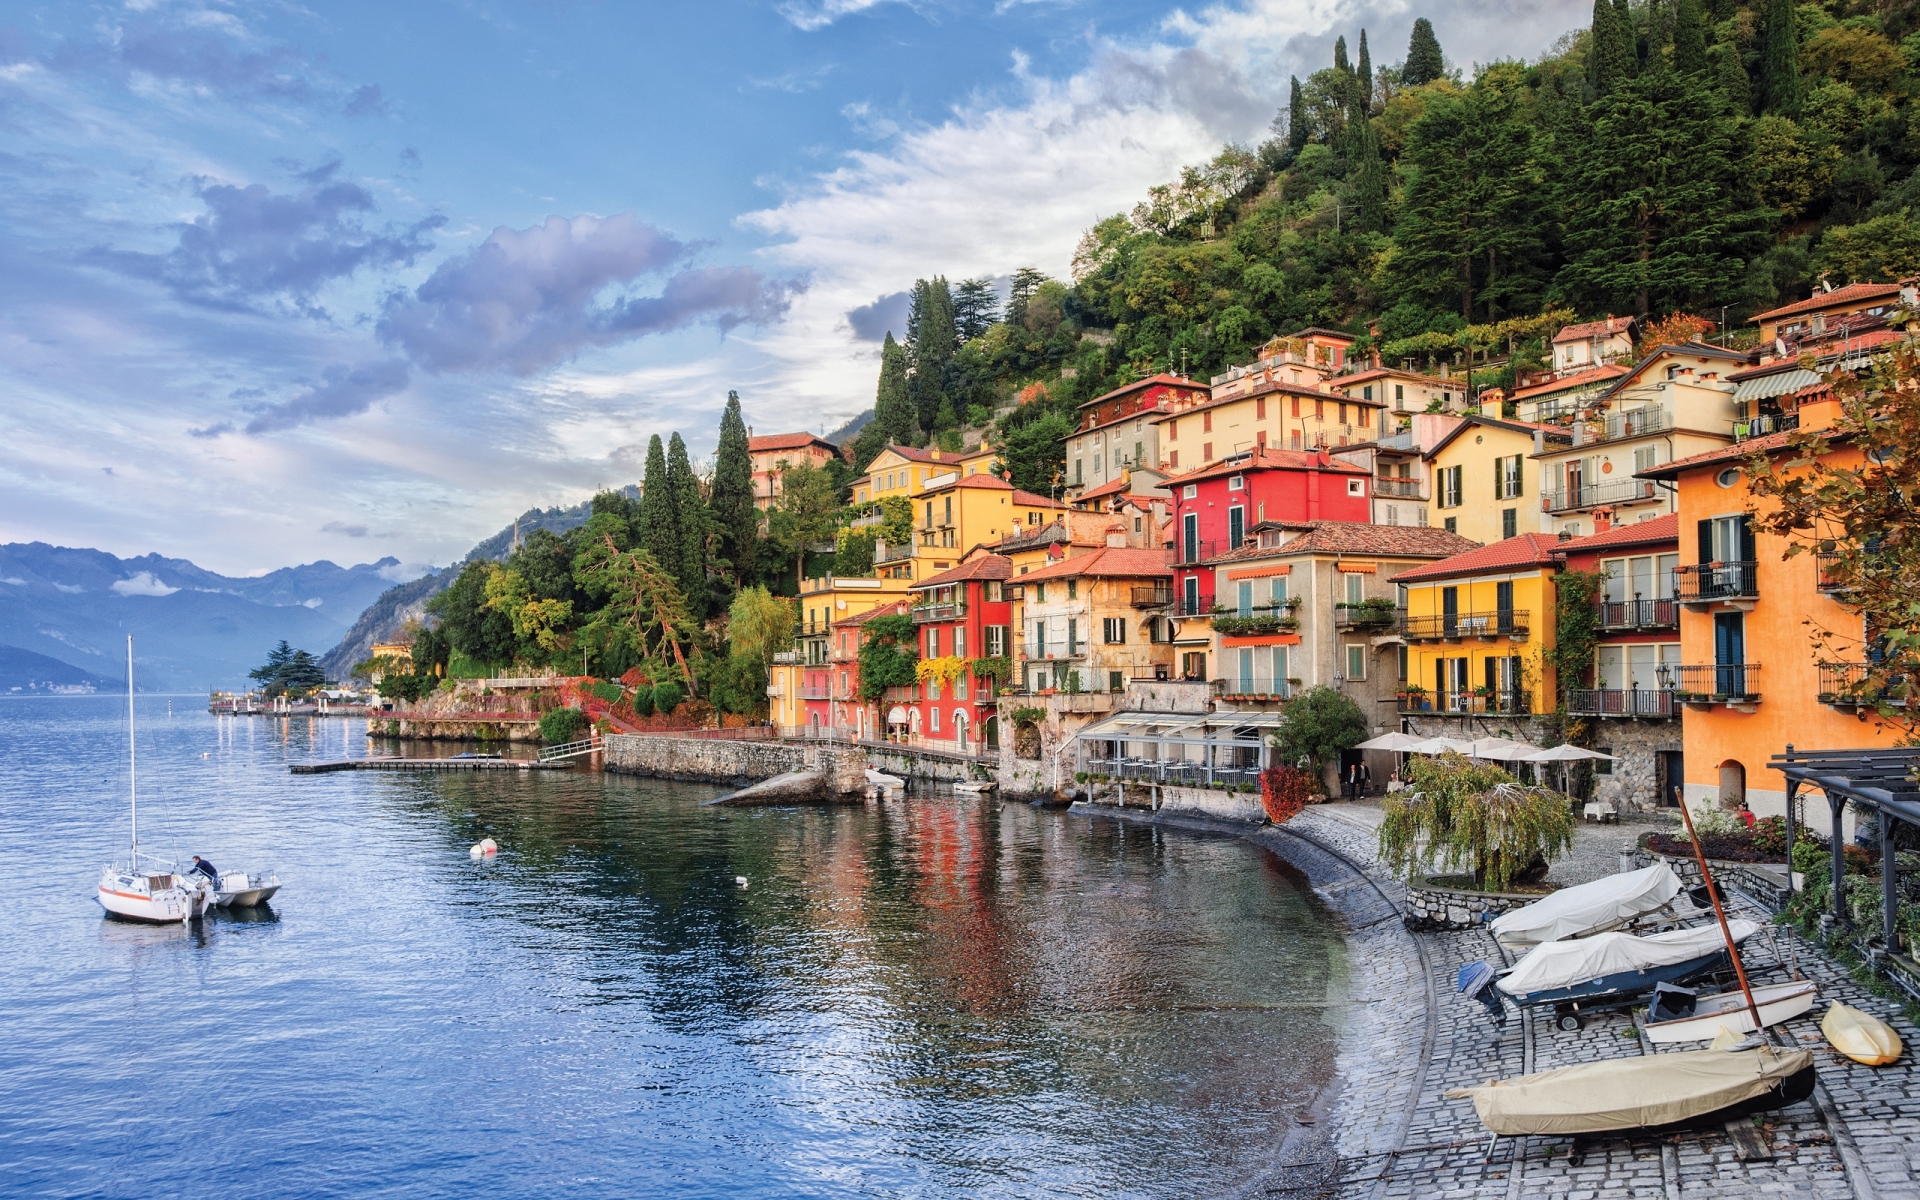 Lake Como itself is one of the deepest lakes in all of Europe and is the third largest lake in Italy.